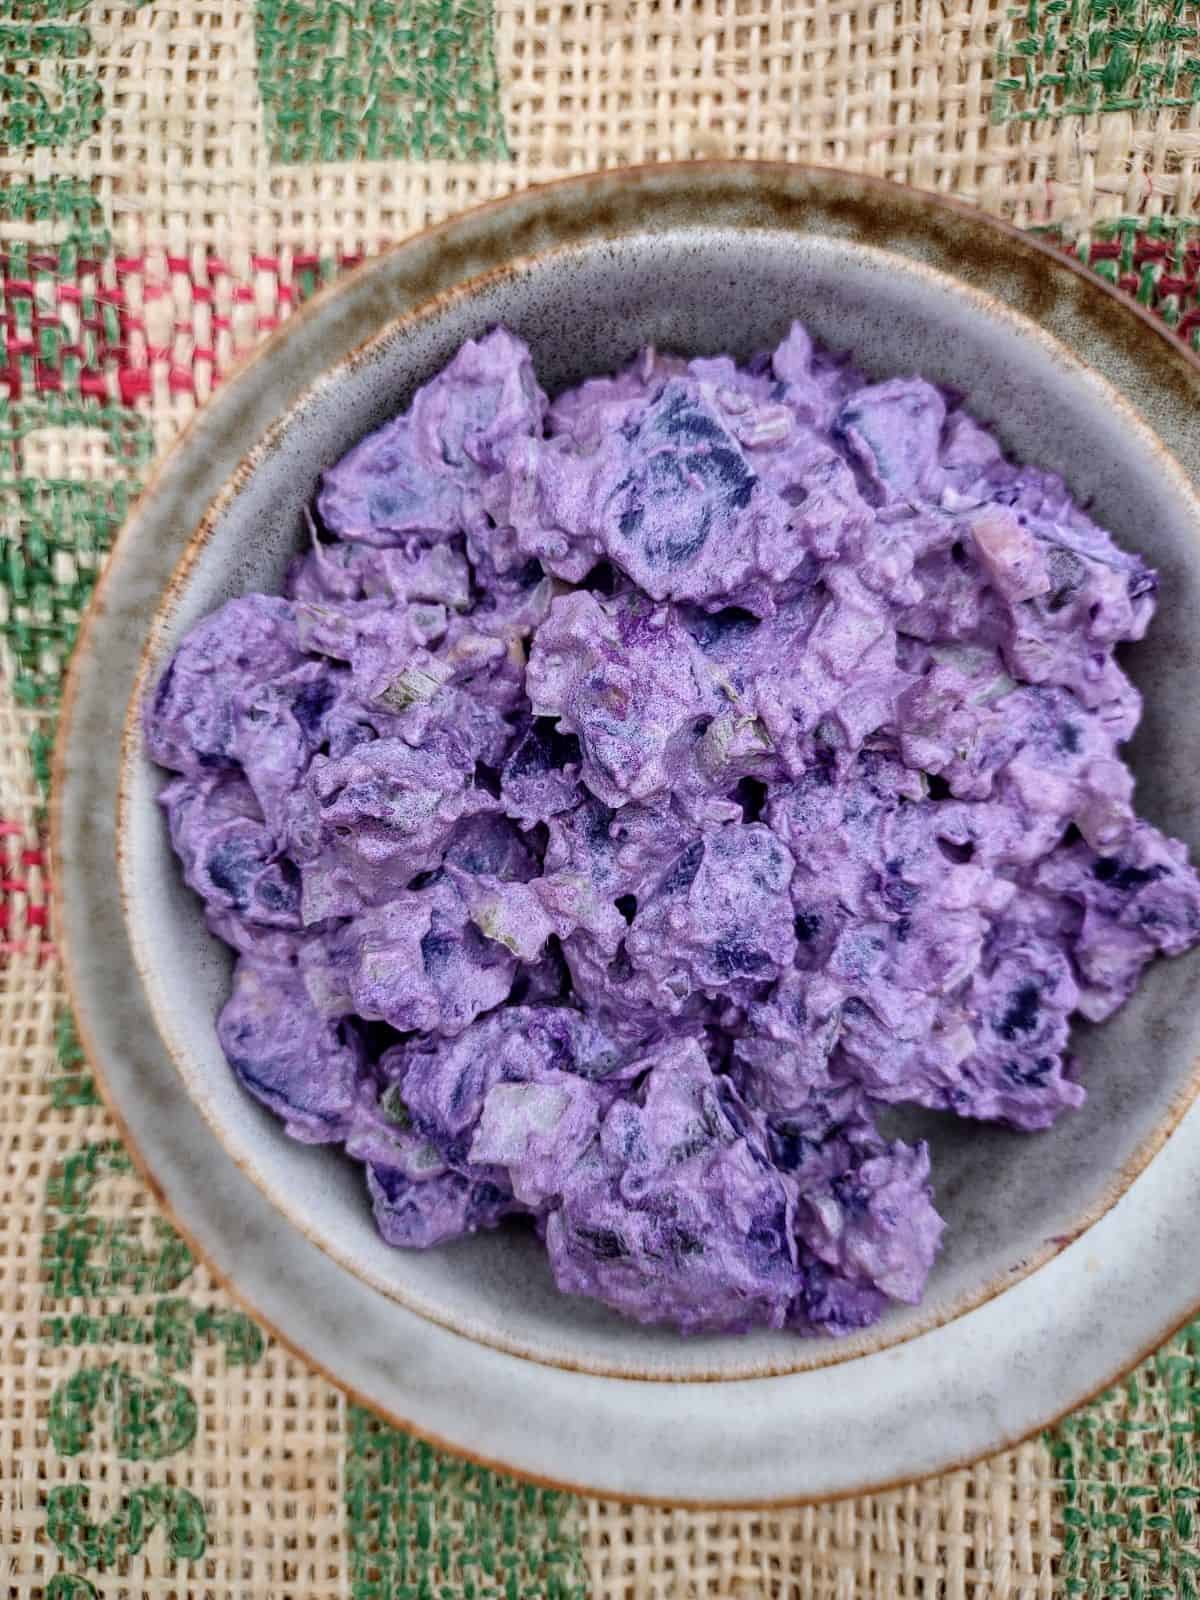 Purple potato salad in a bowl on a plate on top of burlap.